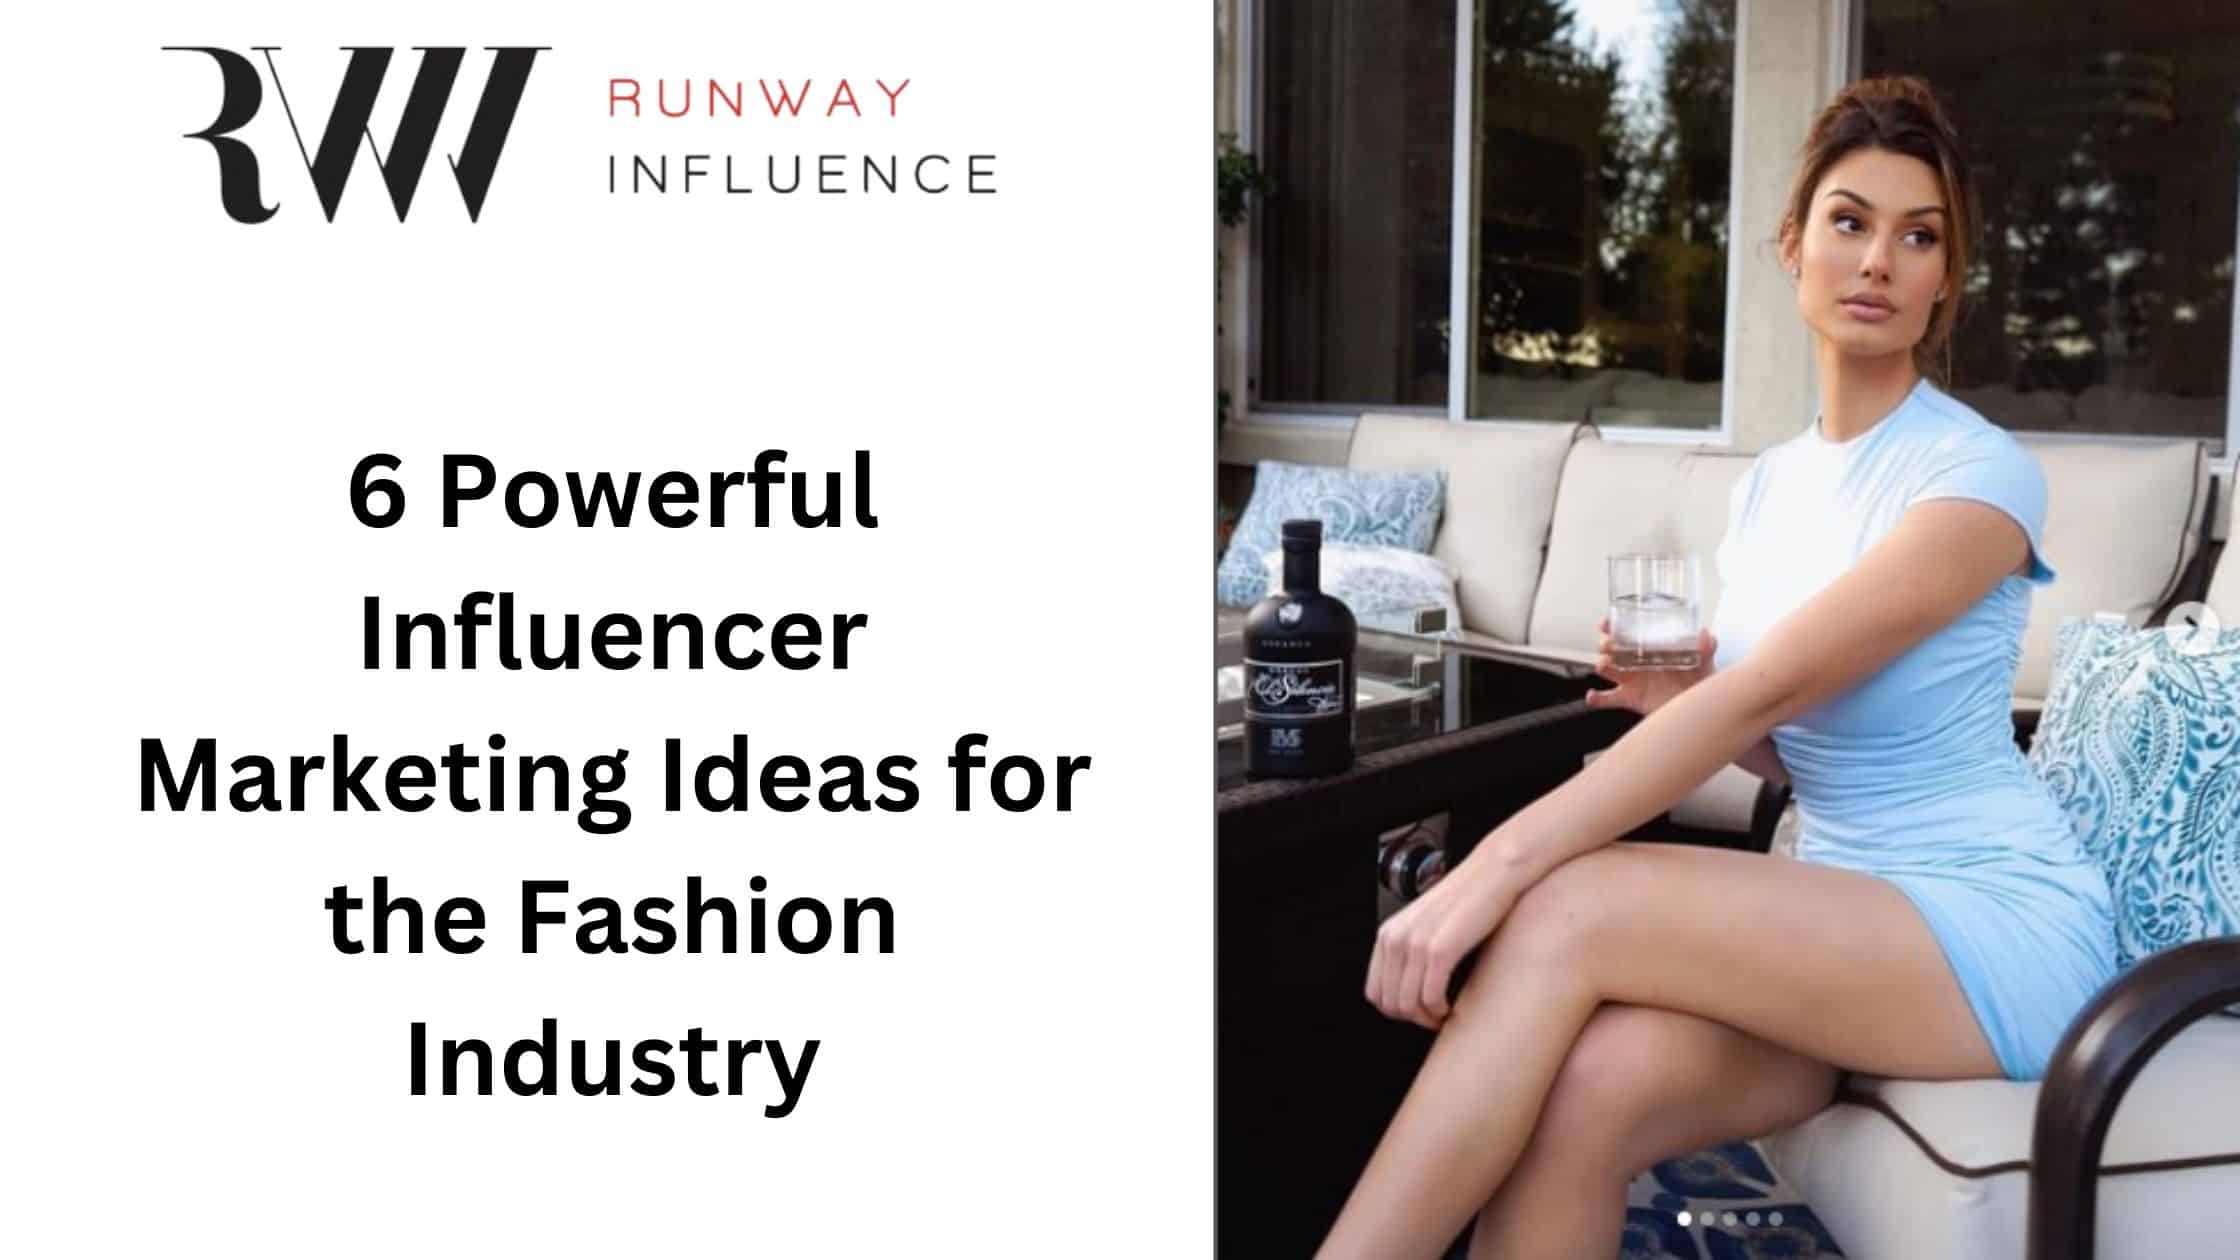 6 Powerful Influencer Marketing Ideas for the Fashion Industry